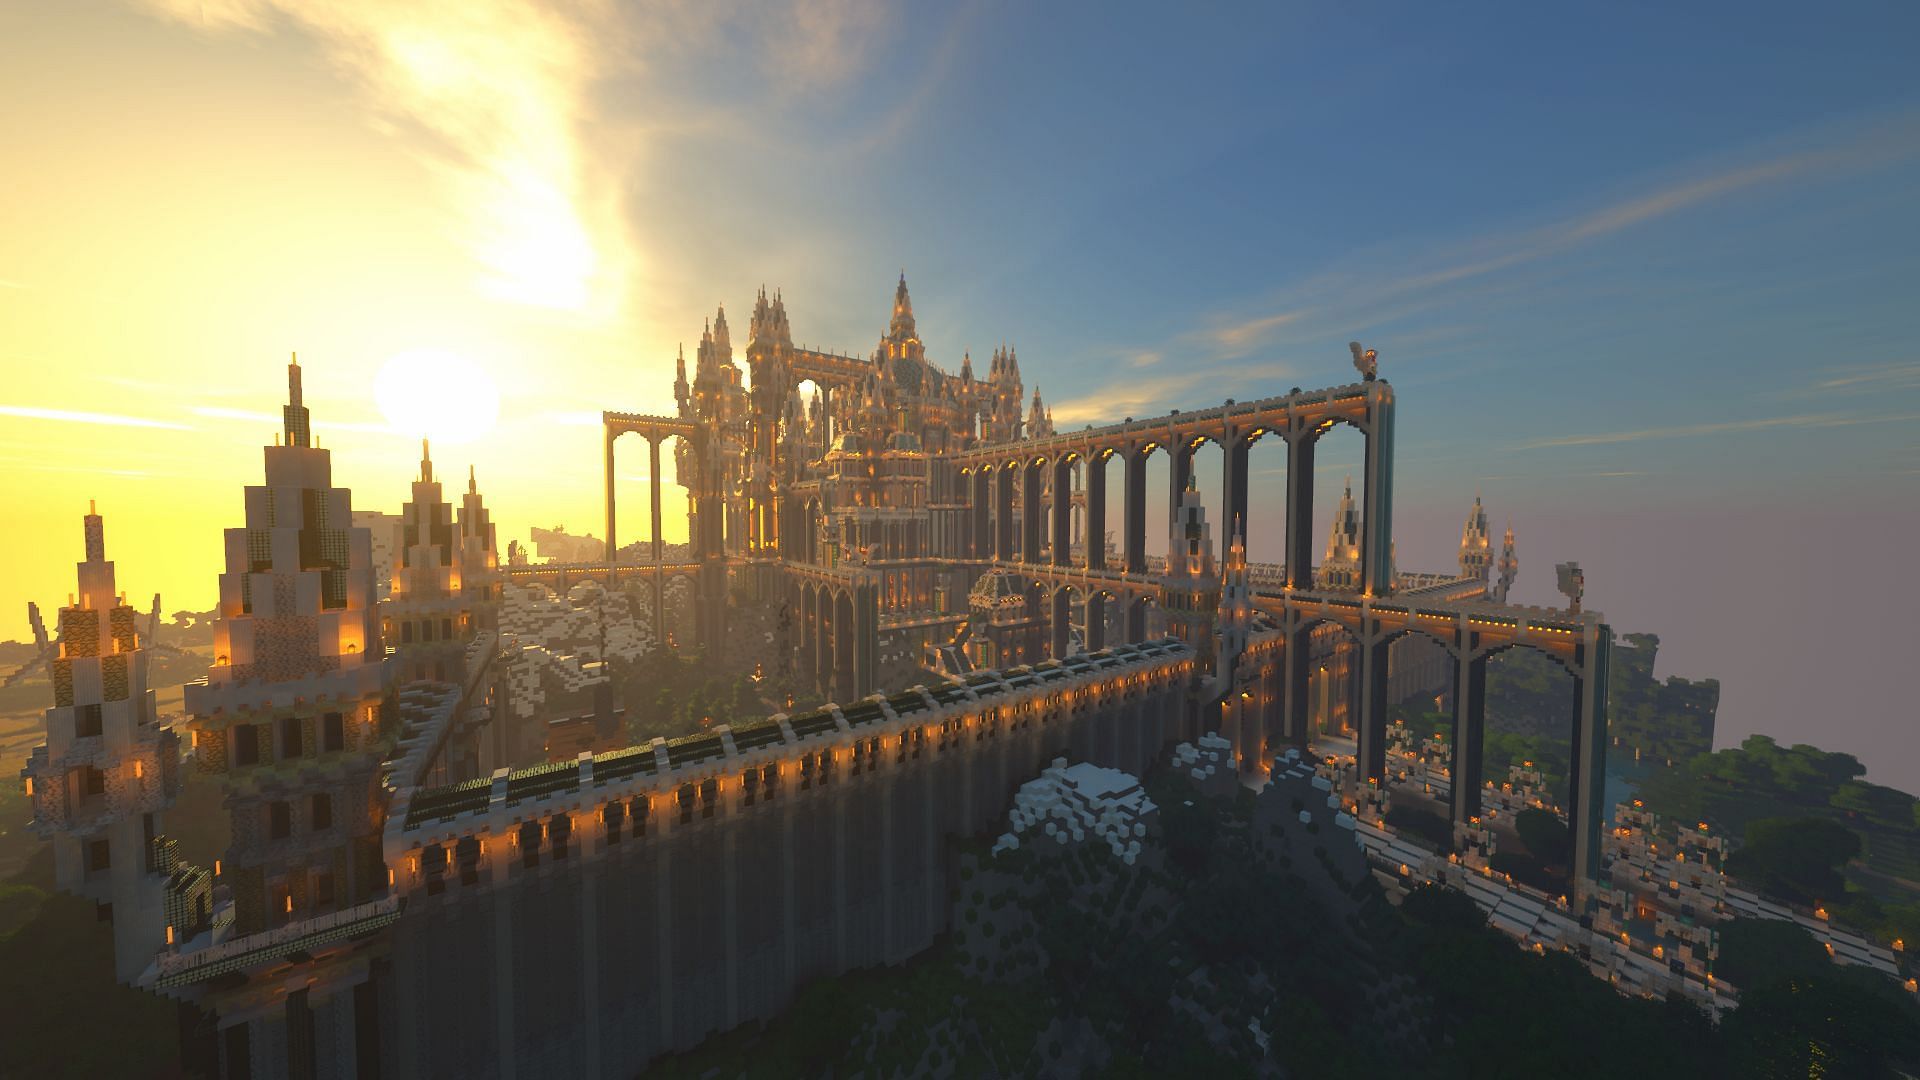 This amazing castle is truly a marvel to behold in Minecraft (Image via u/151owners/Reddit)